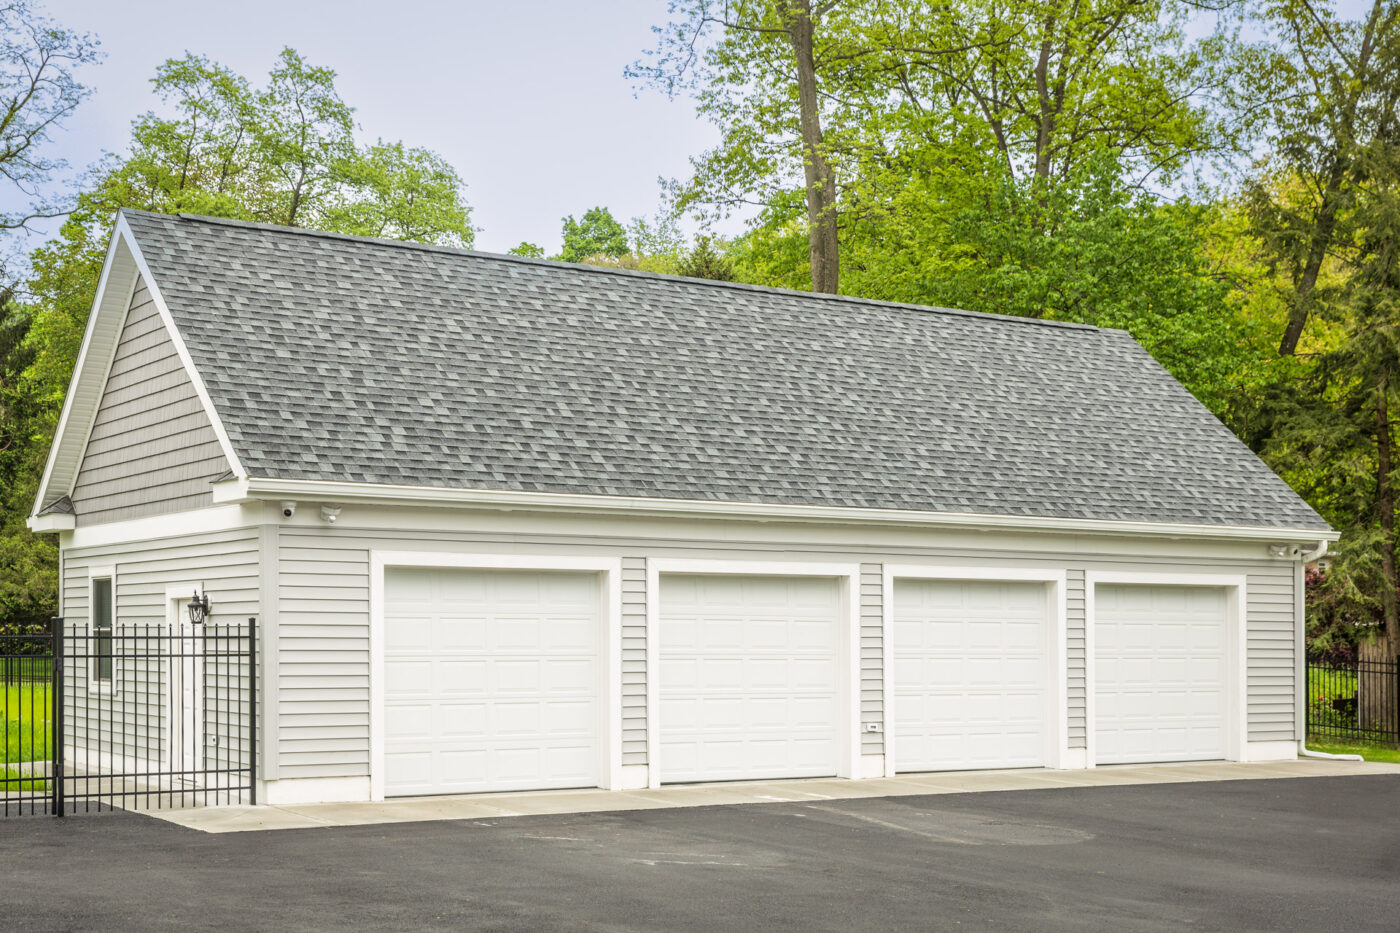 A four-car garage for sale in NH.